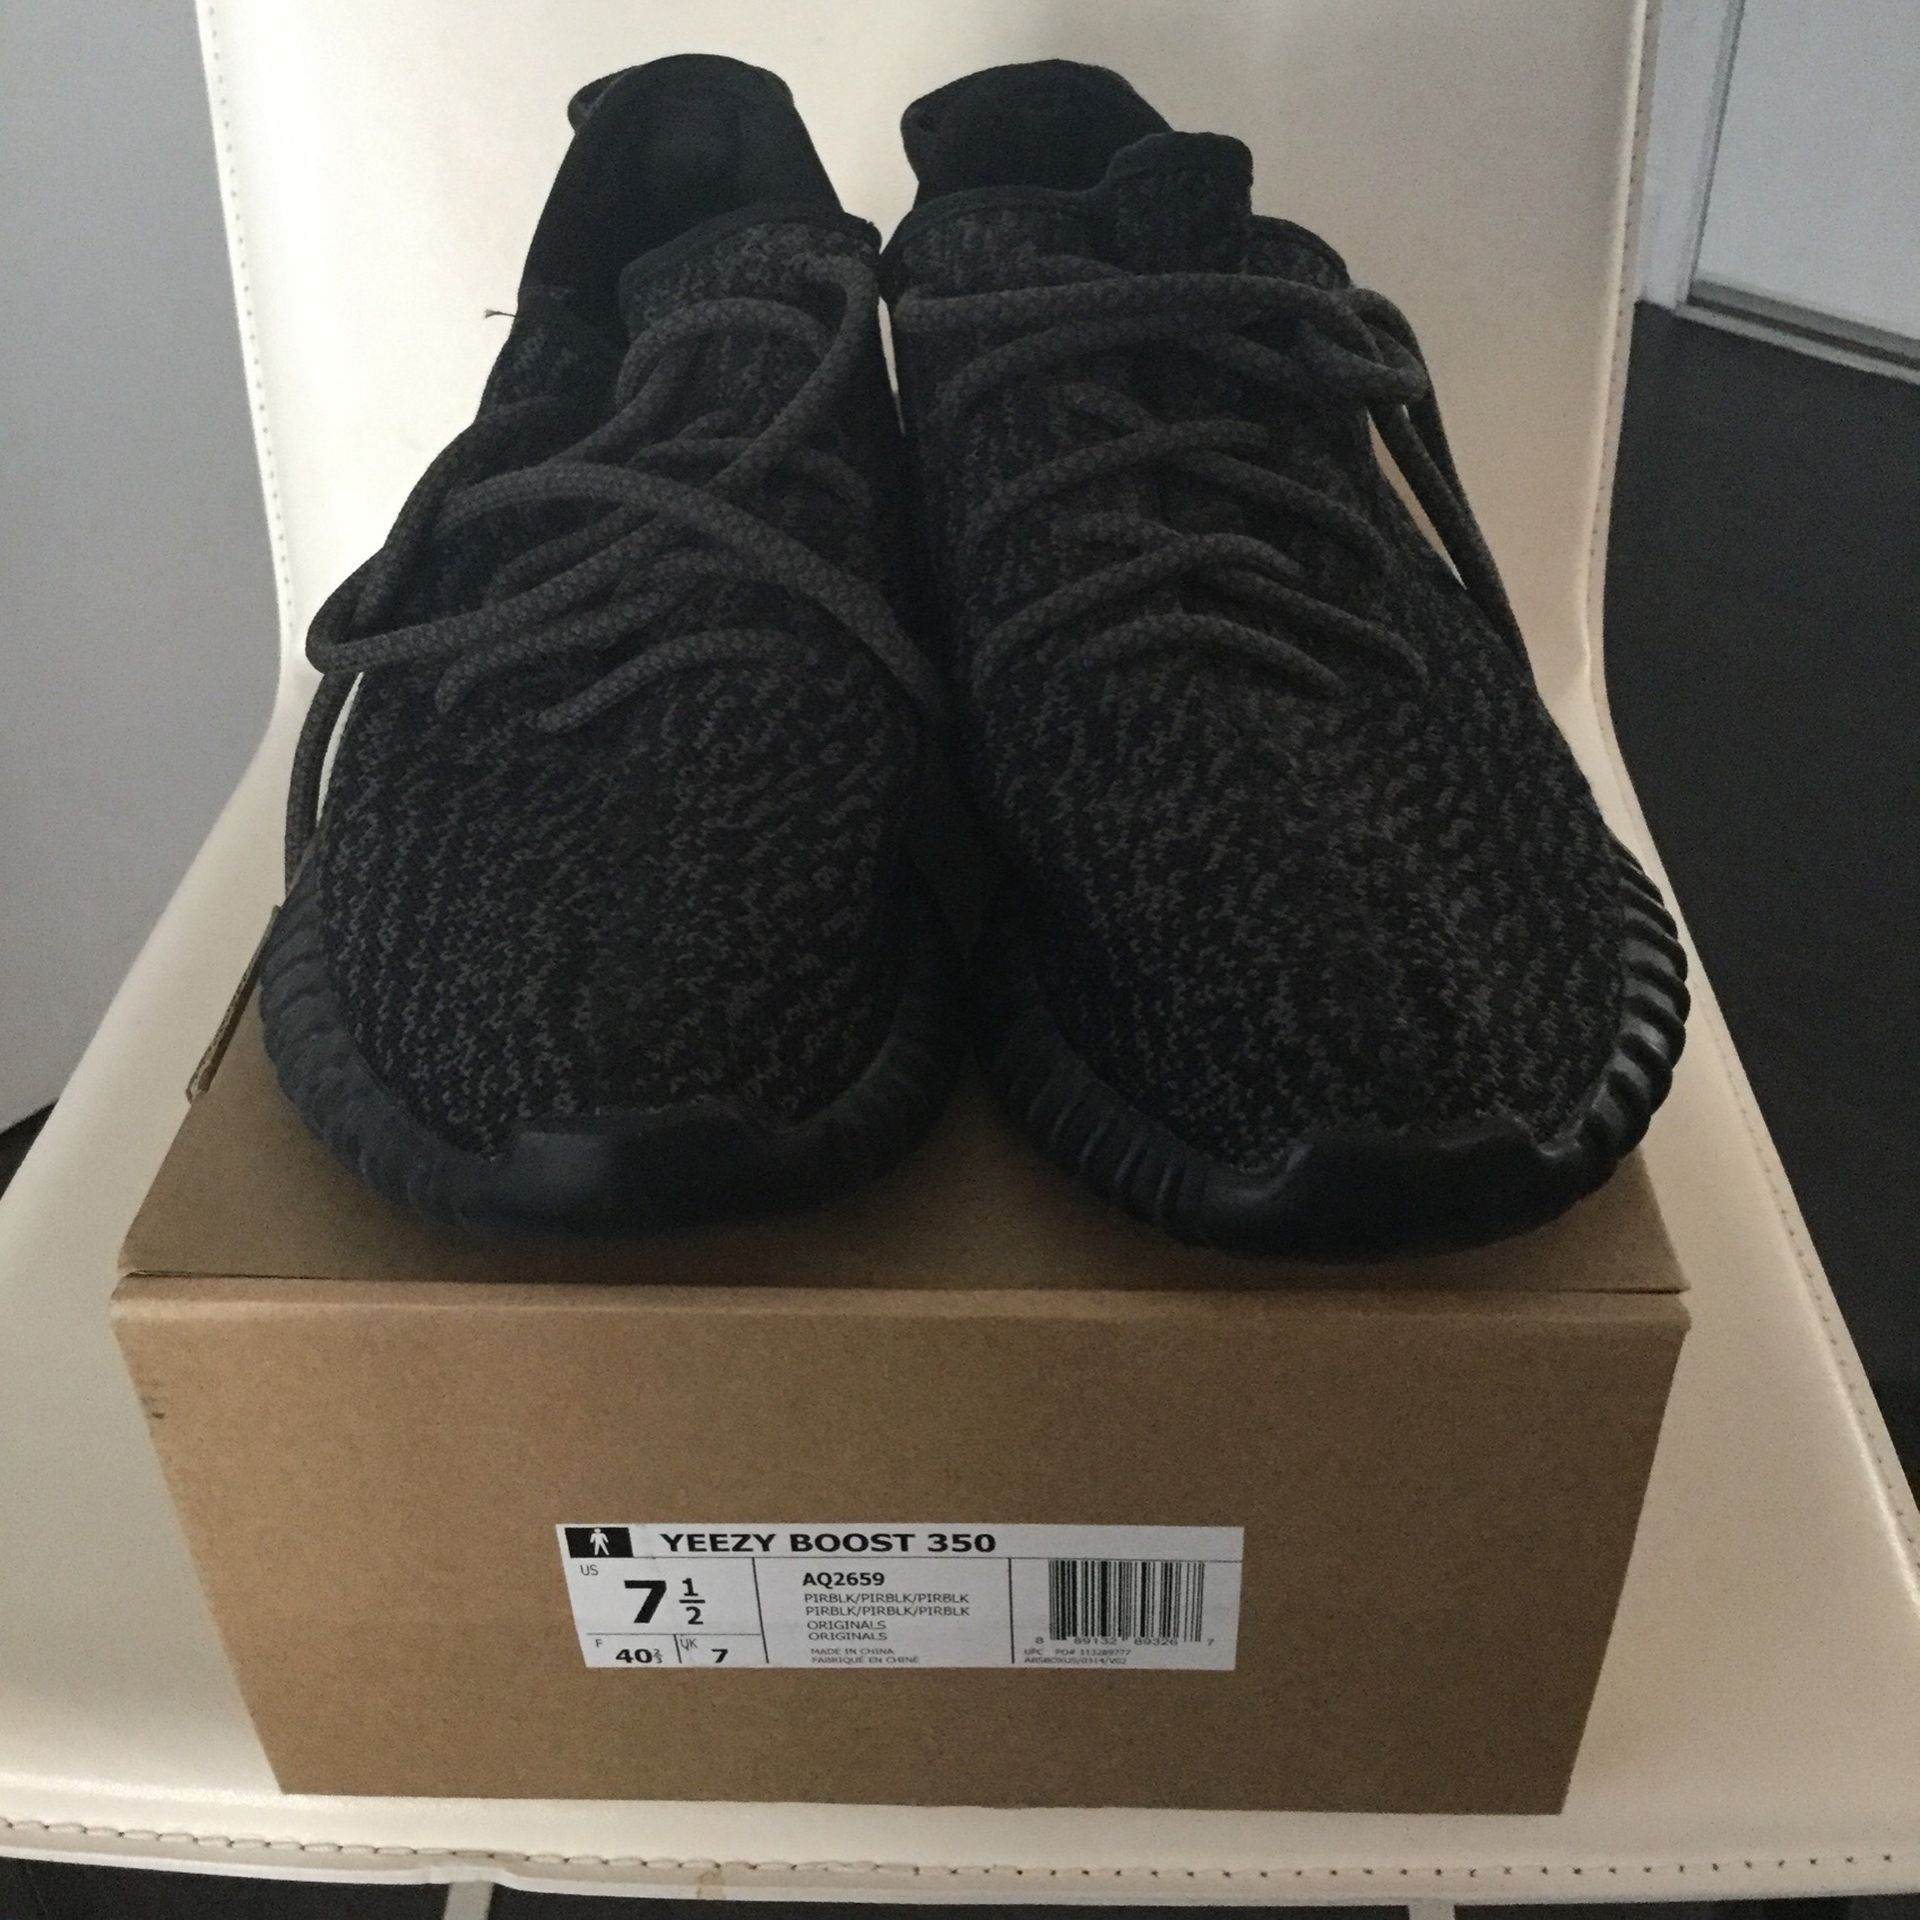 REDUCED - $300 Adidas Yeezy Boost 350 Size 7.5